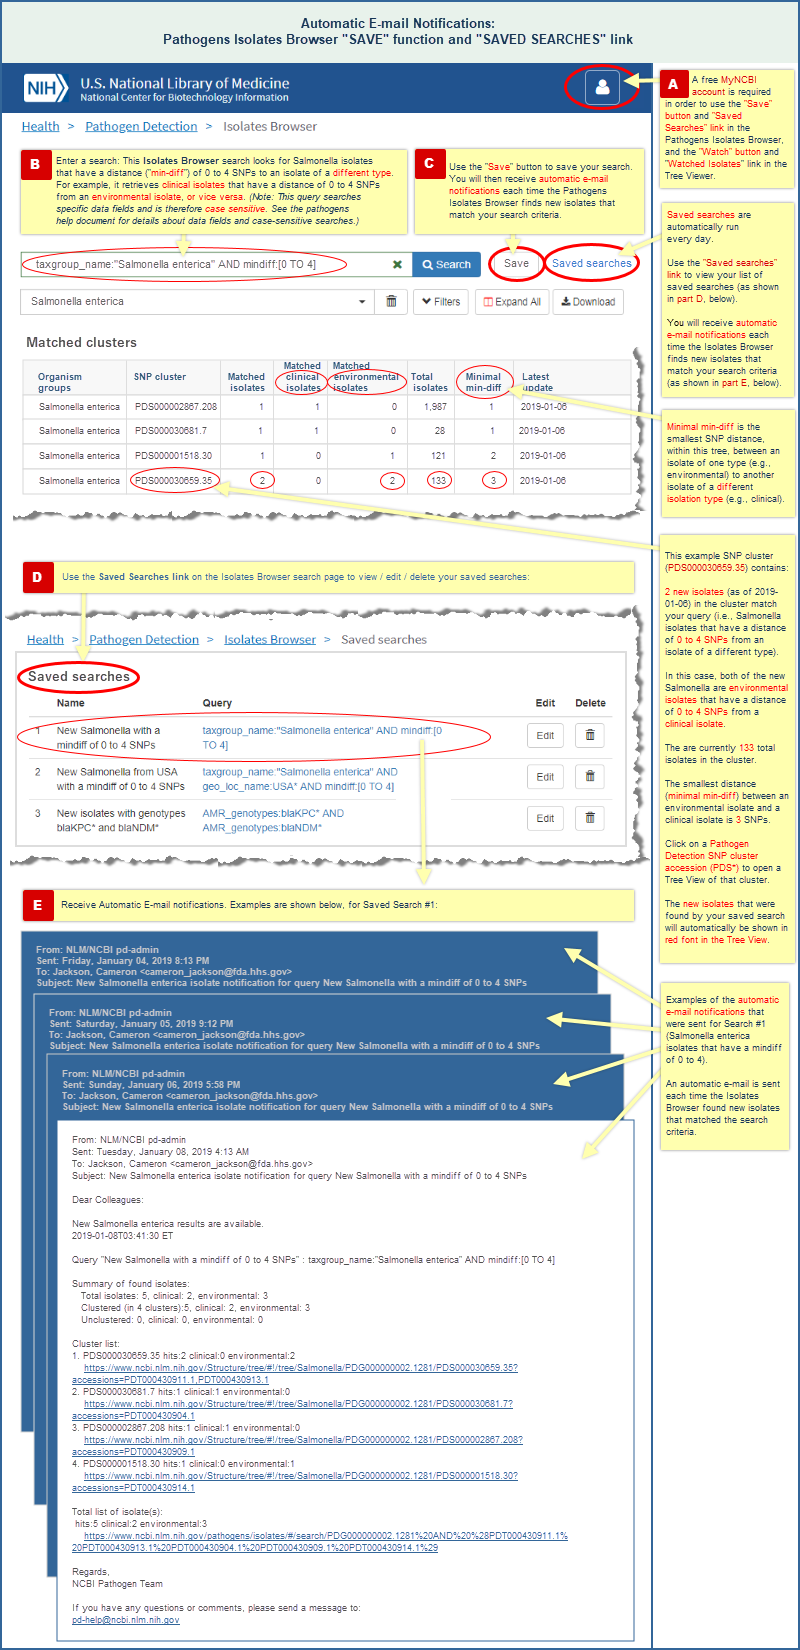 Illustrated example of the Pathogens Isolates Browser SAVE function, and including an example of an automatic e-mail message that contains a notification of new isolates that match the saved search.